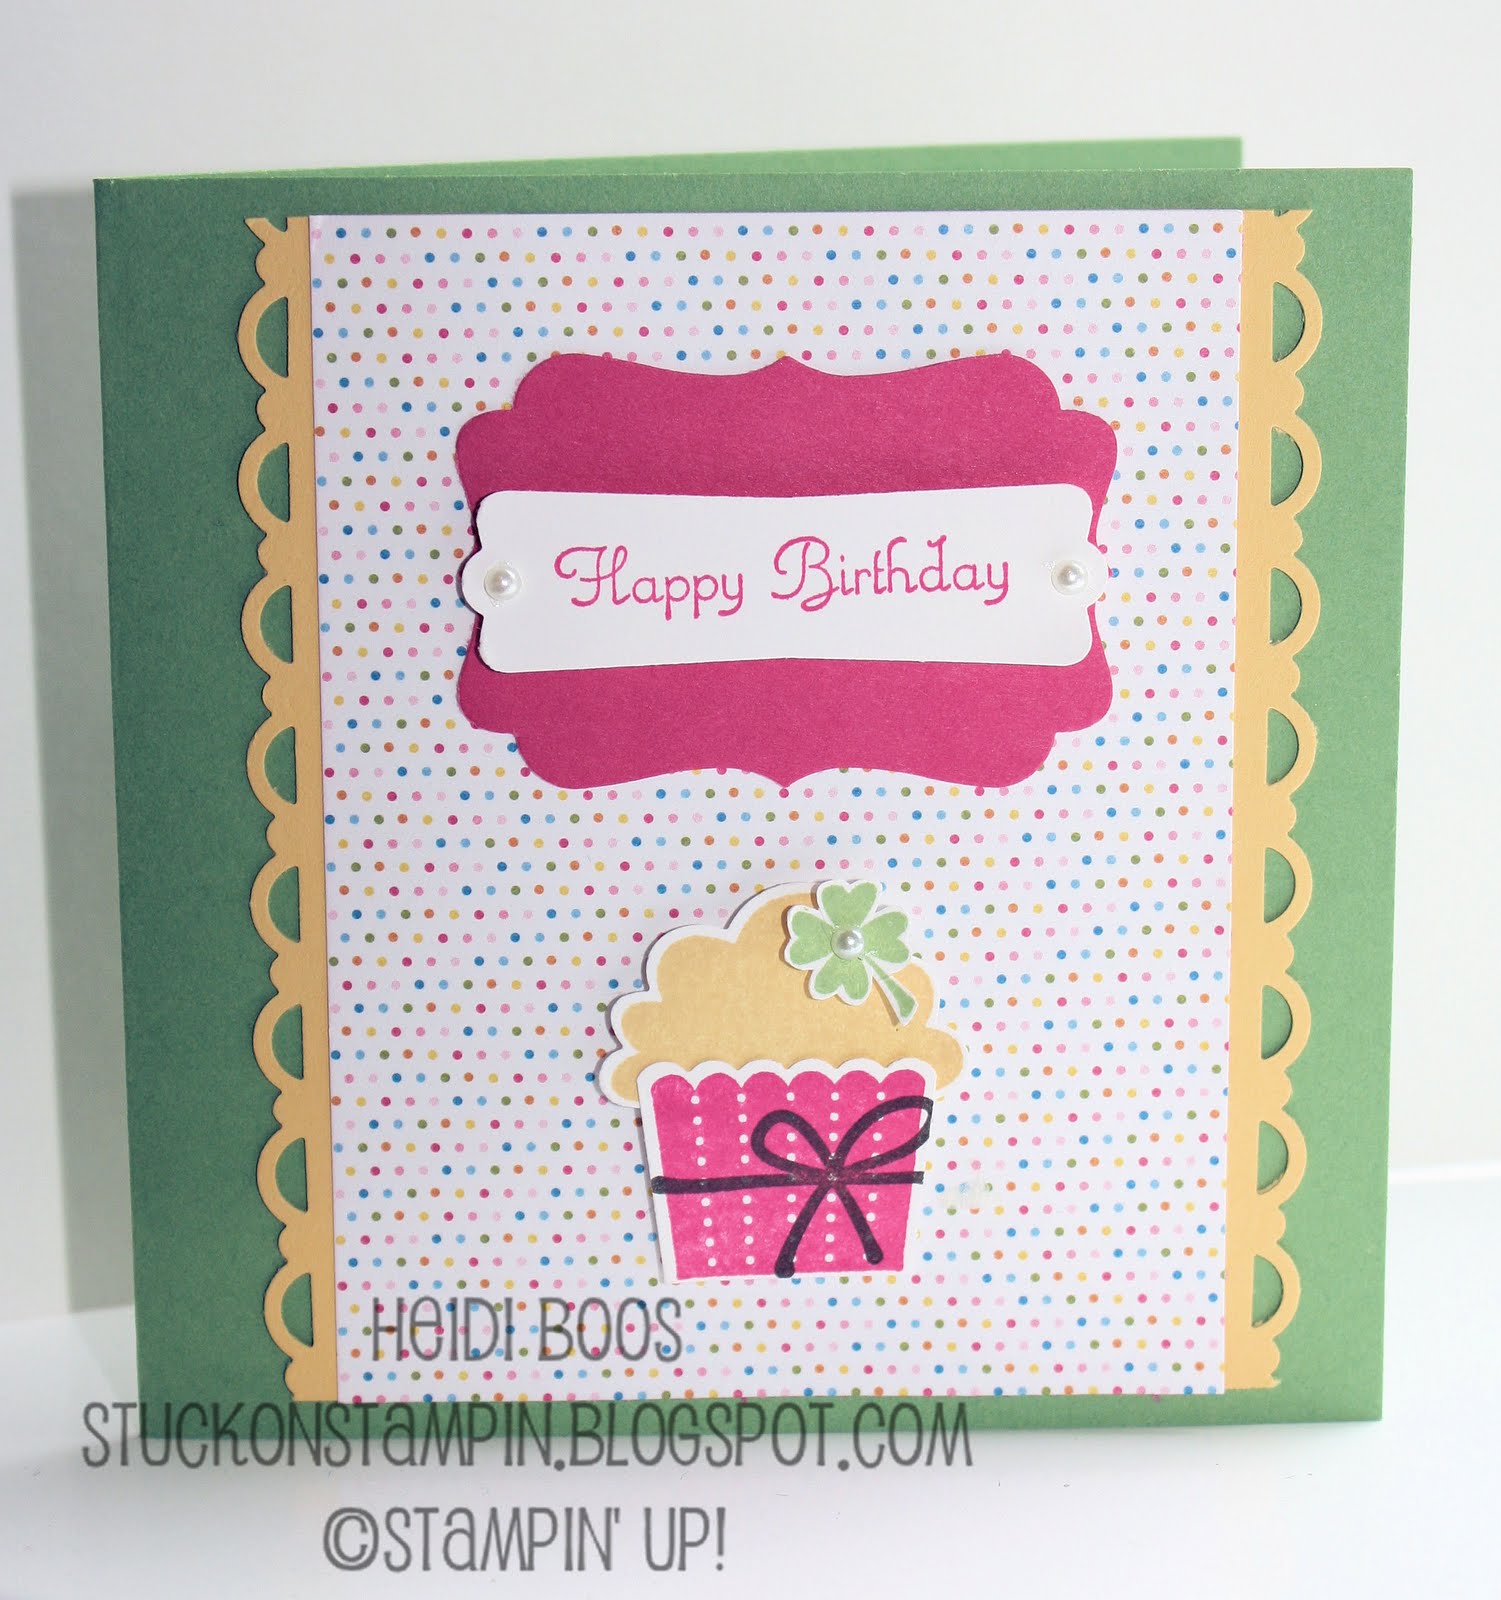 Stuck on Stampin': crazy for {clean & simple} cupcakes!